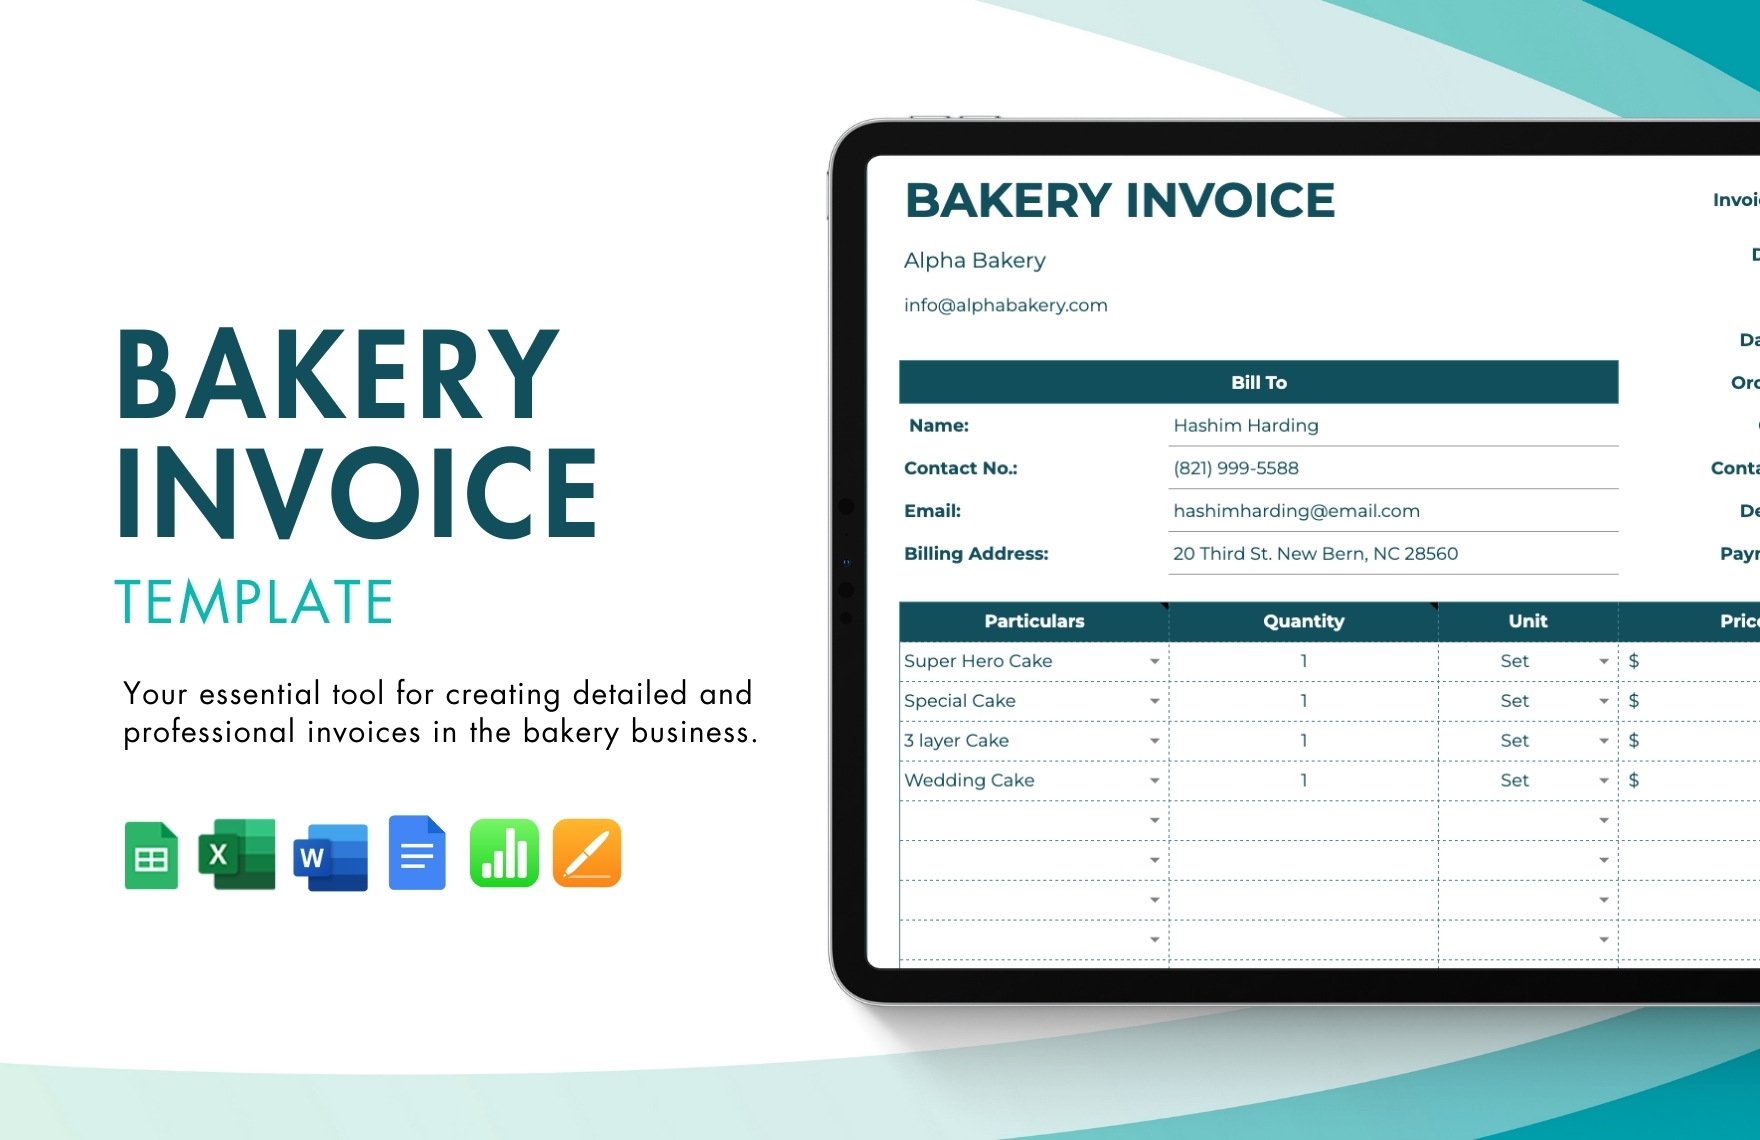 Bakery Invoice Template in Word, Google Docs, Excel, Google Sheets, Apple Pages, Apple Numbers